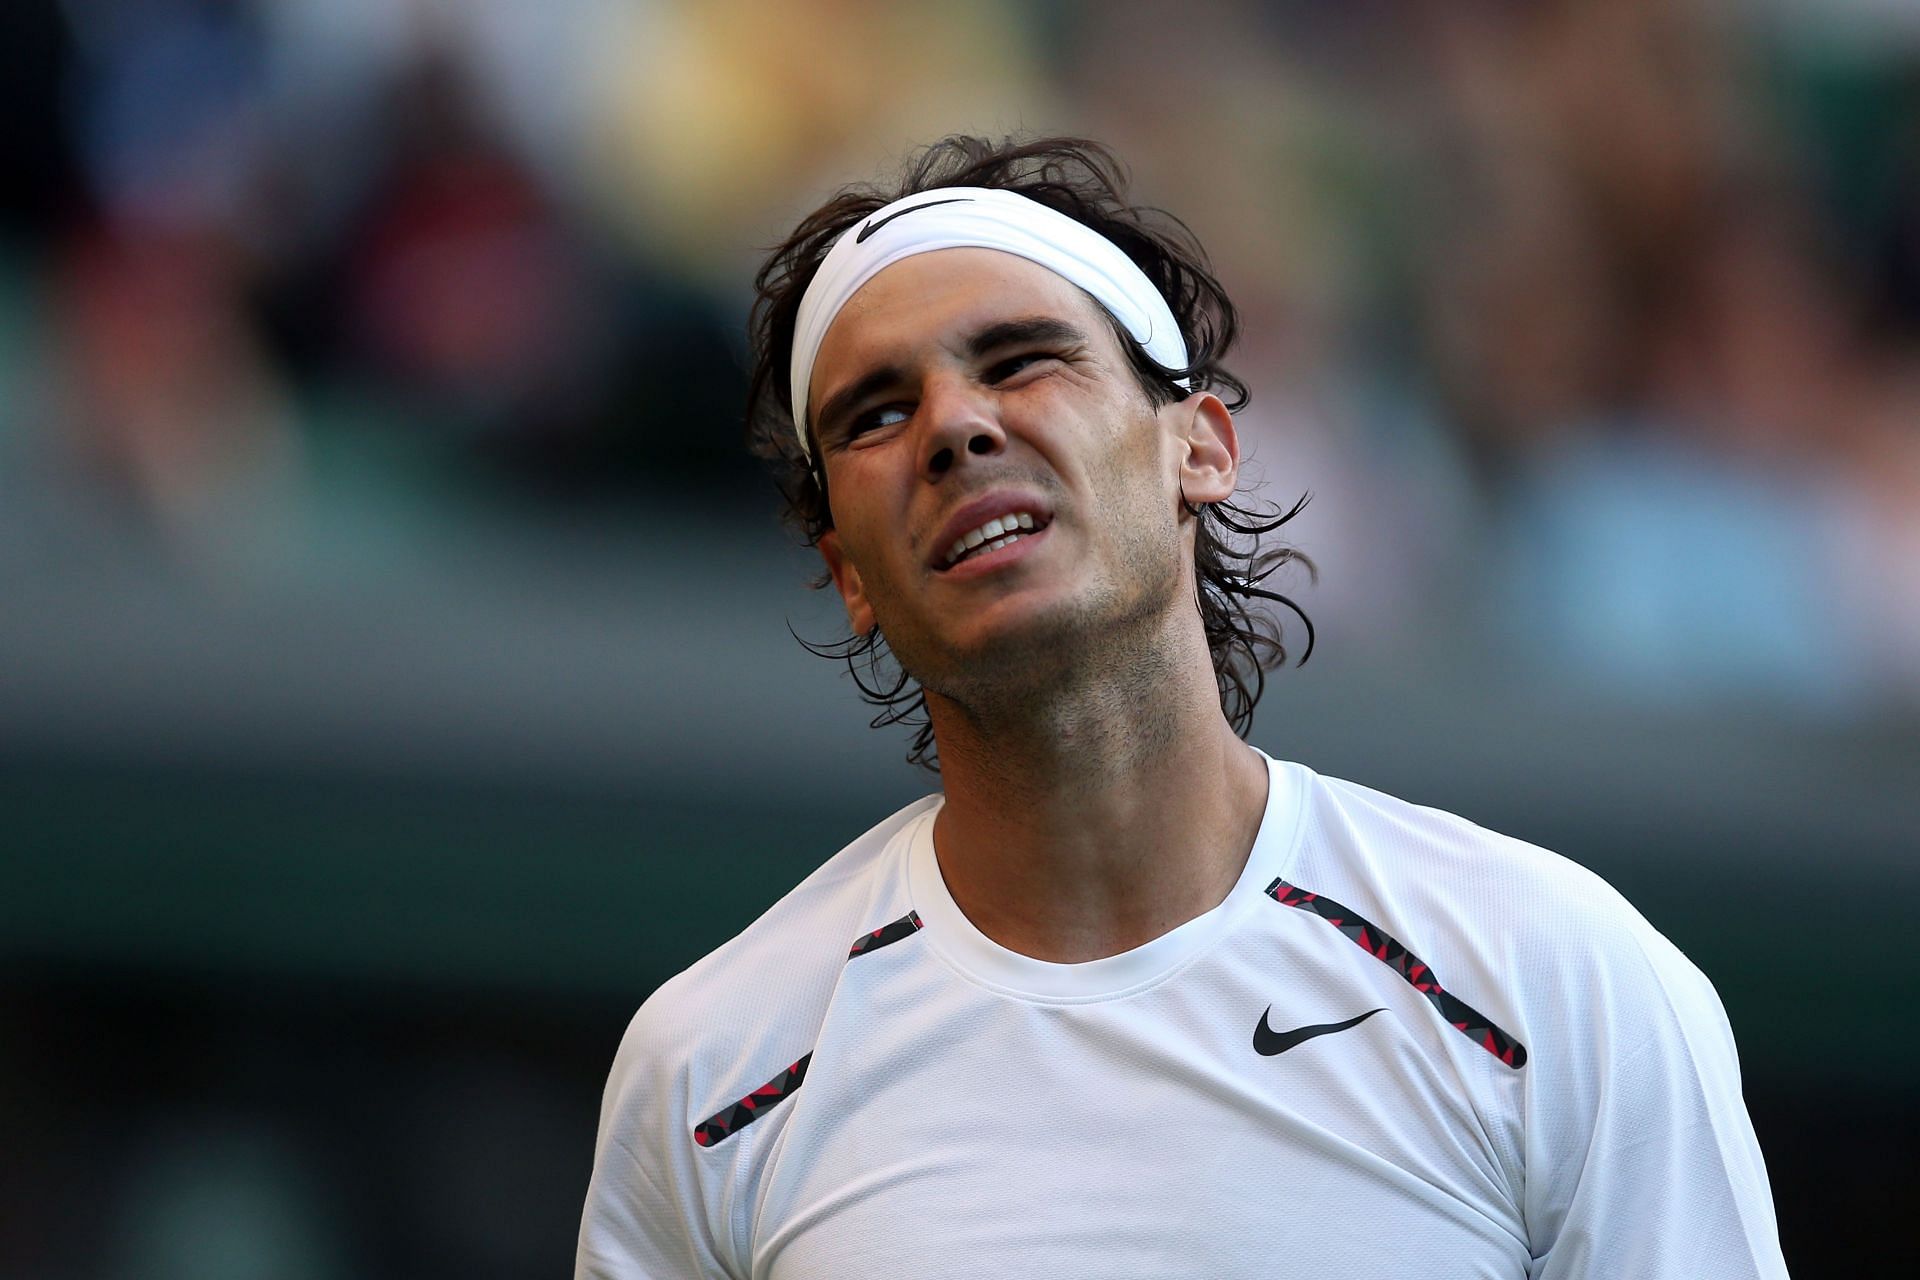 The Championships - Wimbledon 2012: Day Four